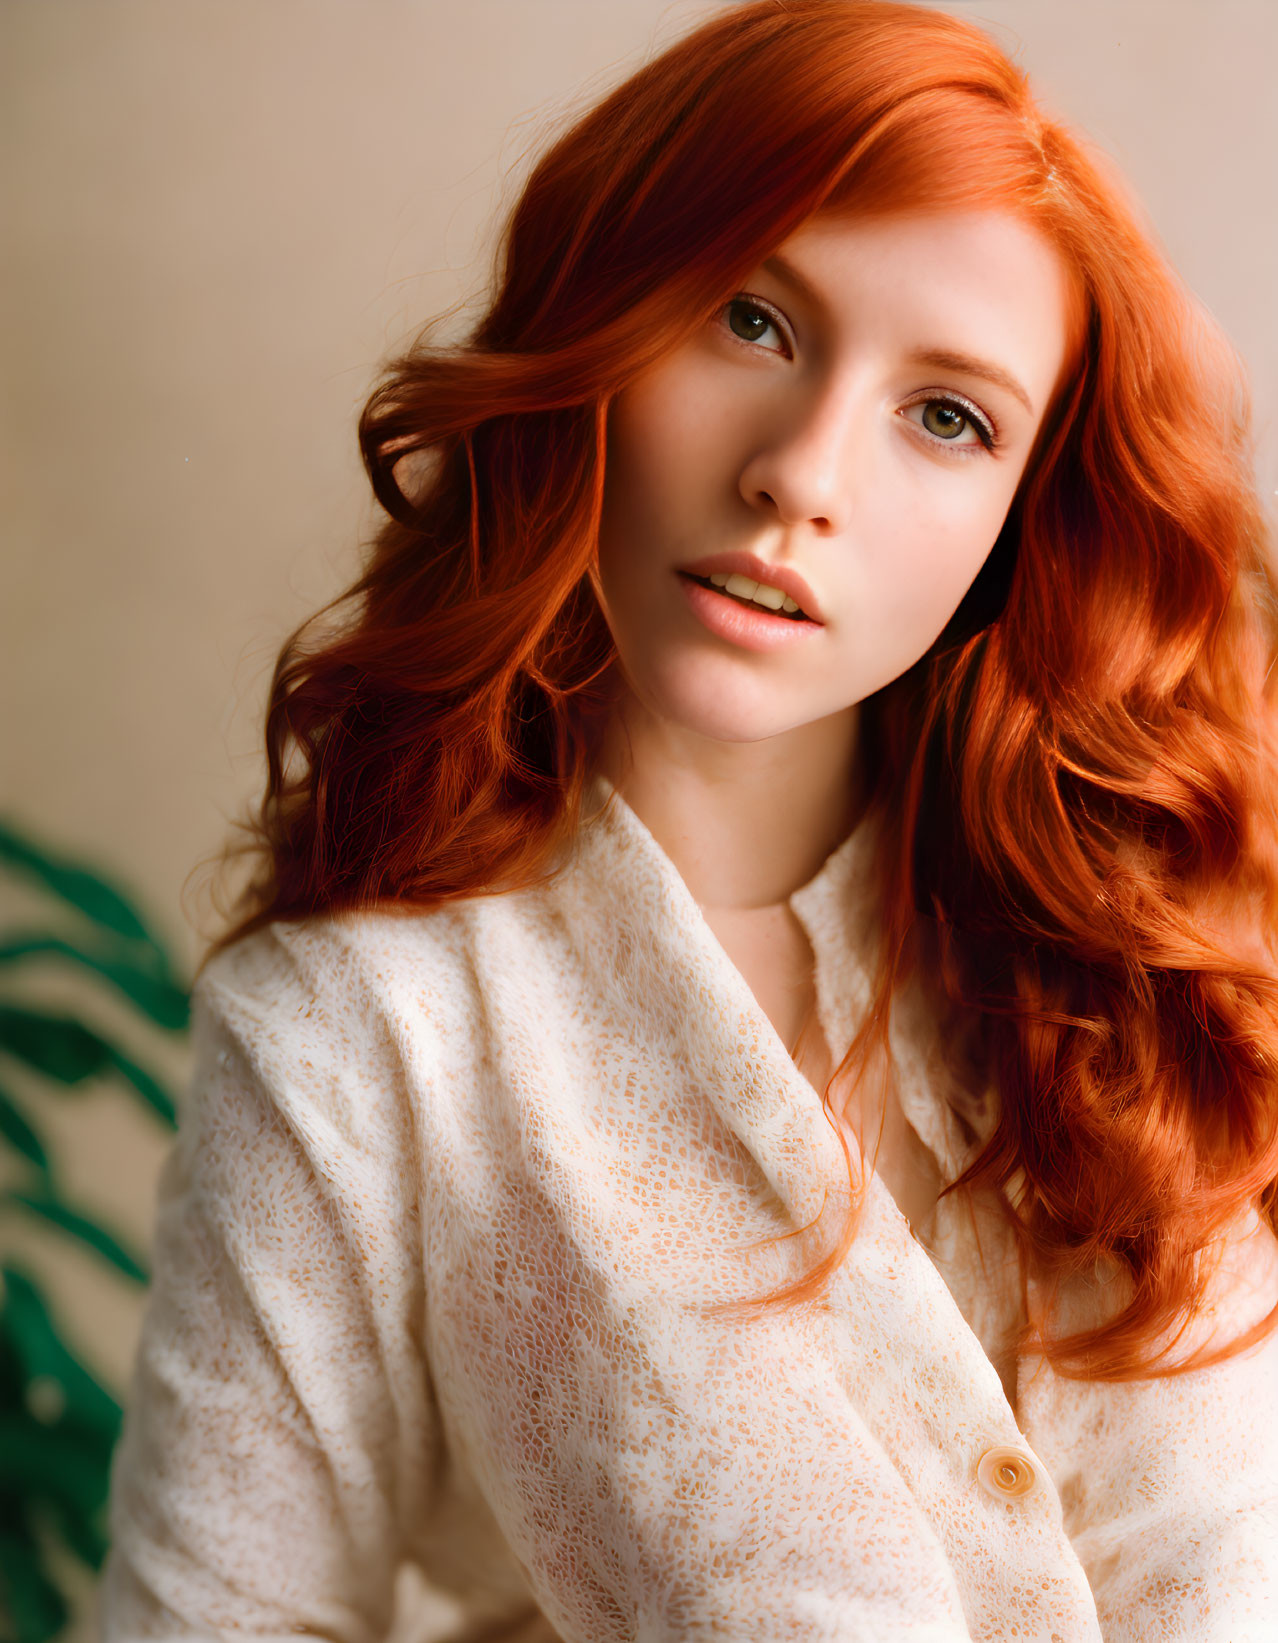 Portrait of person with long red hair and white shirt on neutral background